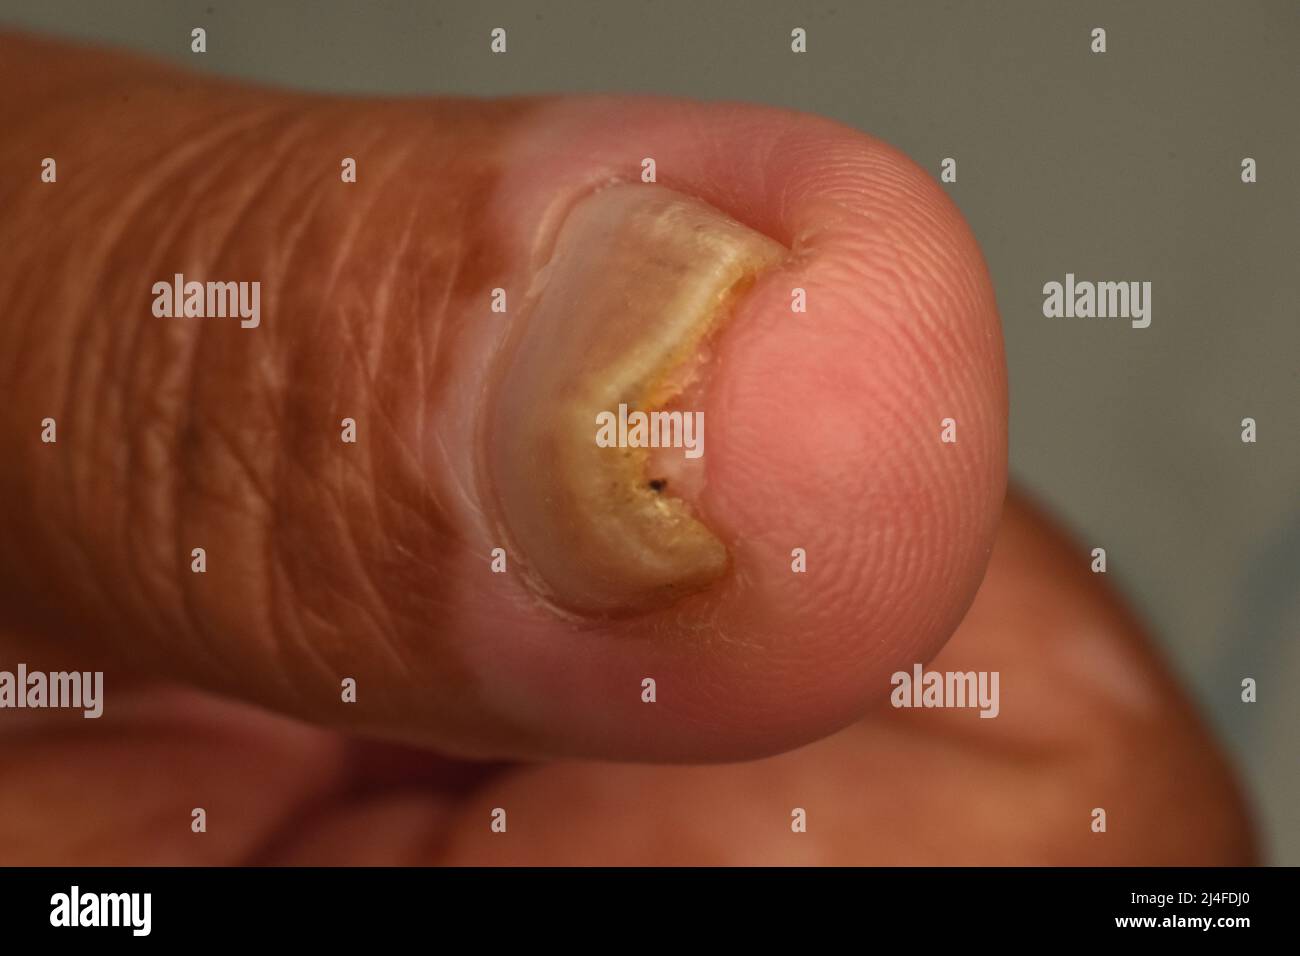 Plicatured nail condition may relate to other medical conditions. Stock Photo